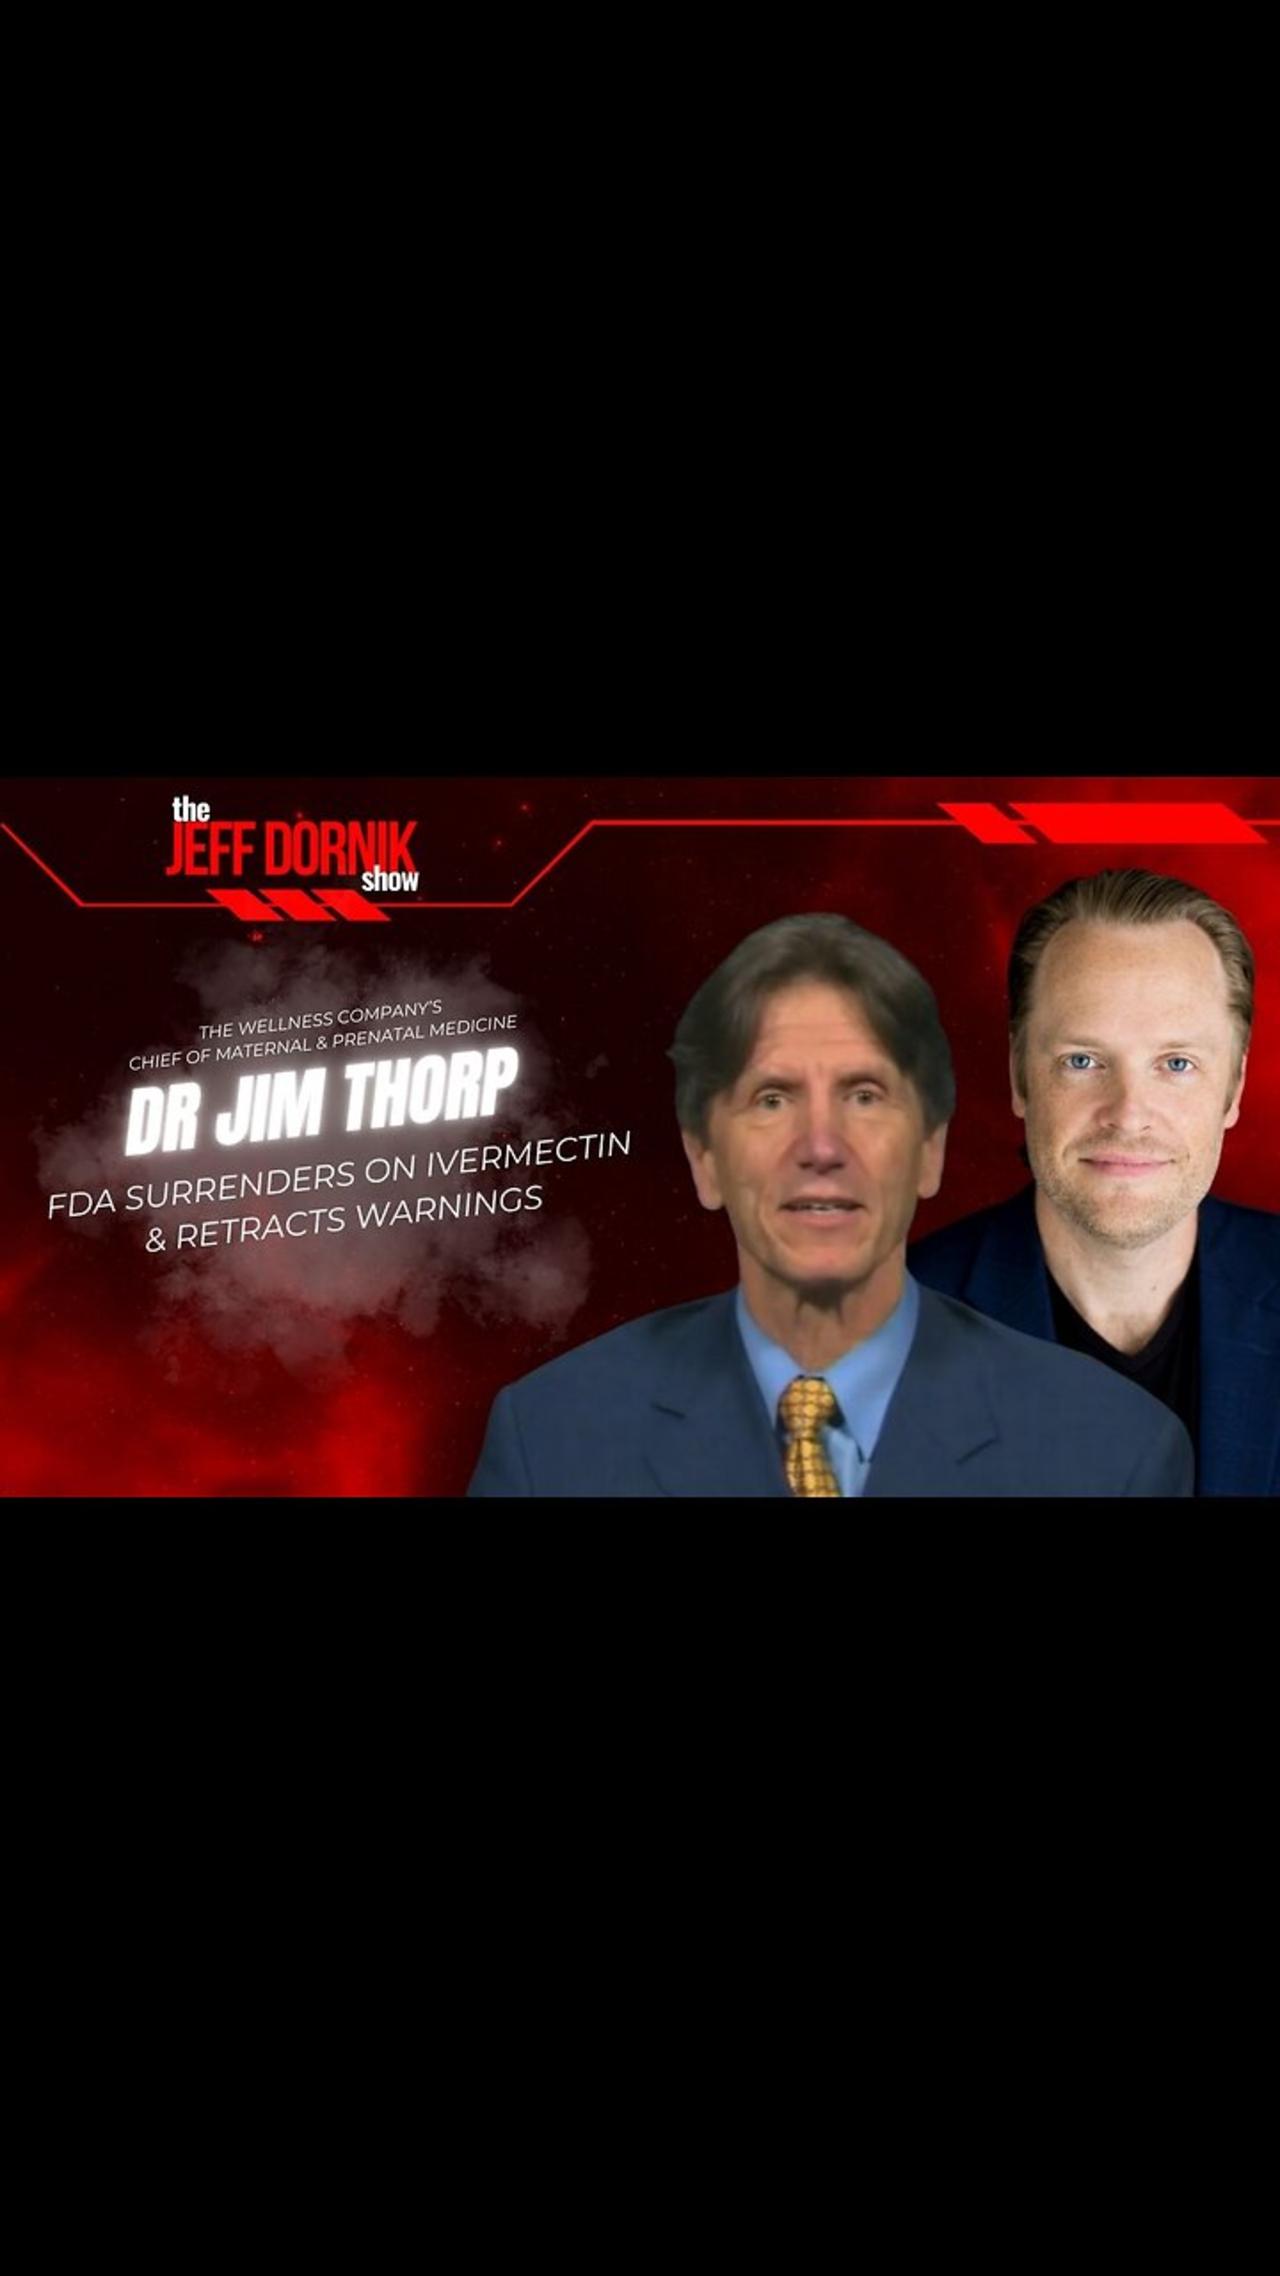 The Jeff Dornik Show: FDA Surrenders on Ivermectin and Retracts Warnings | Guest Dr Jim Thorp